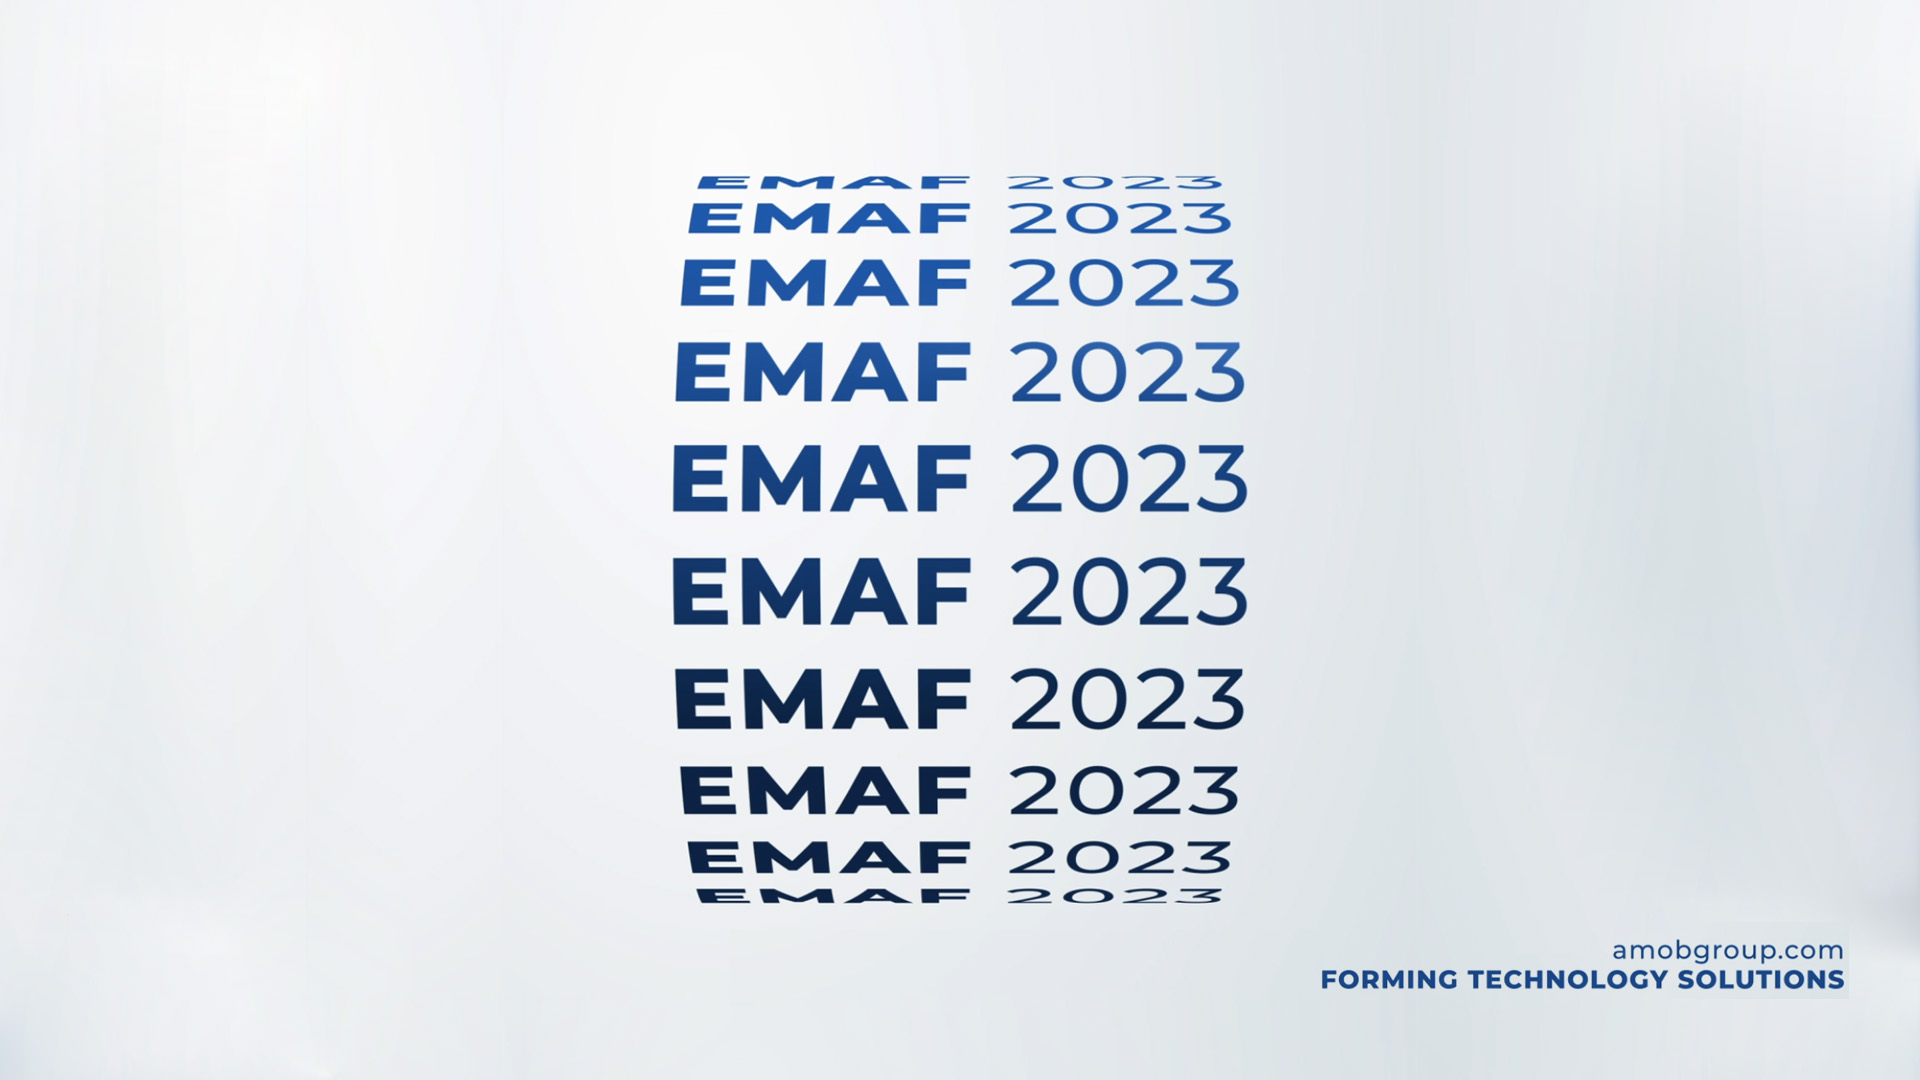 For the 19th consecutive time, AMOB is present at EMAF.